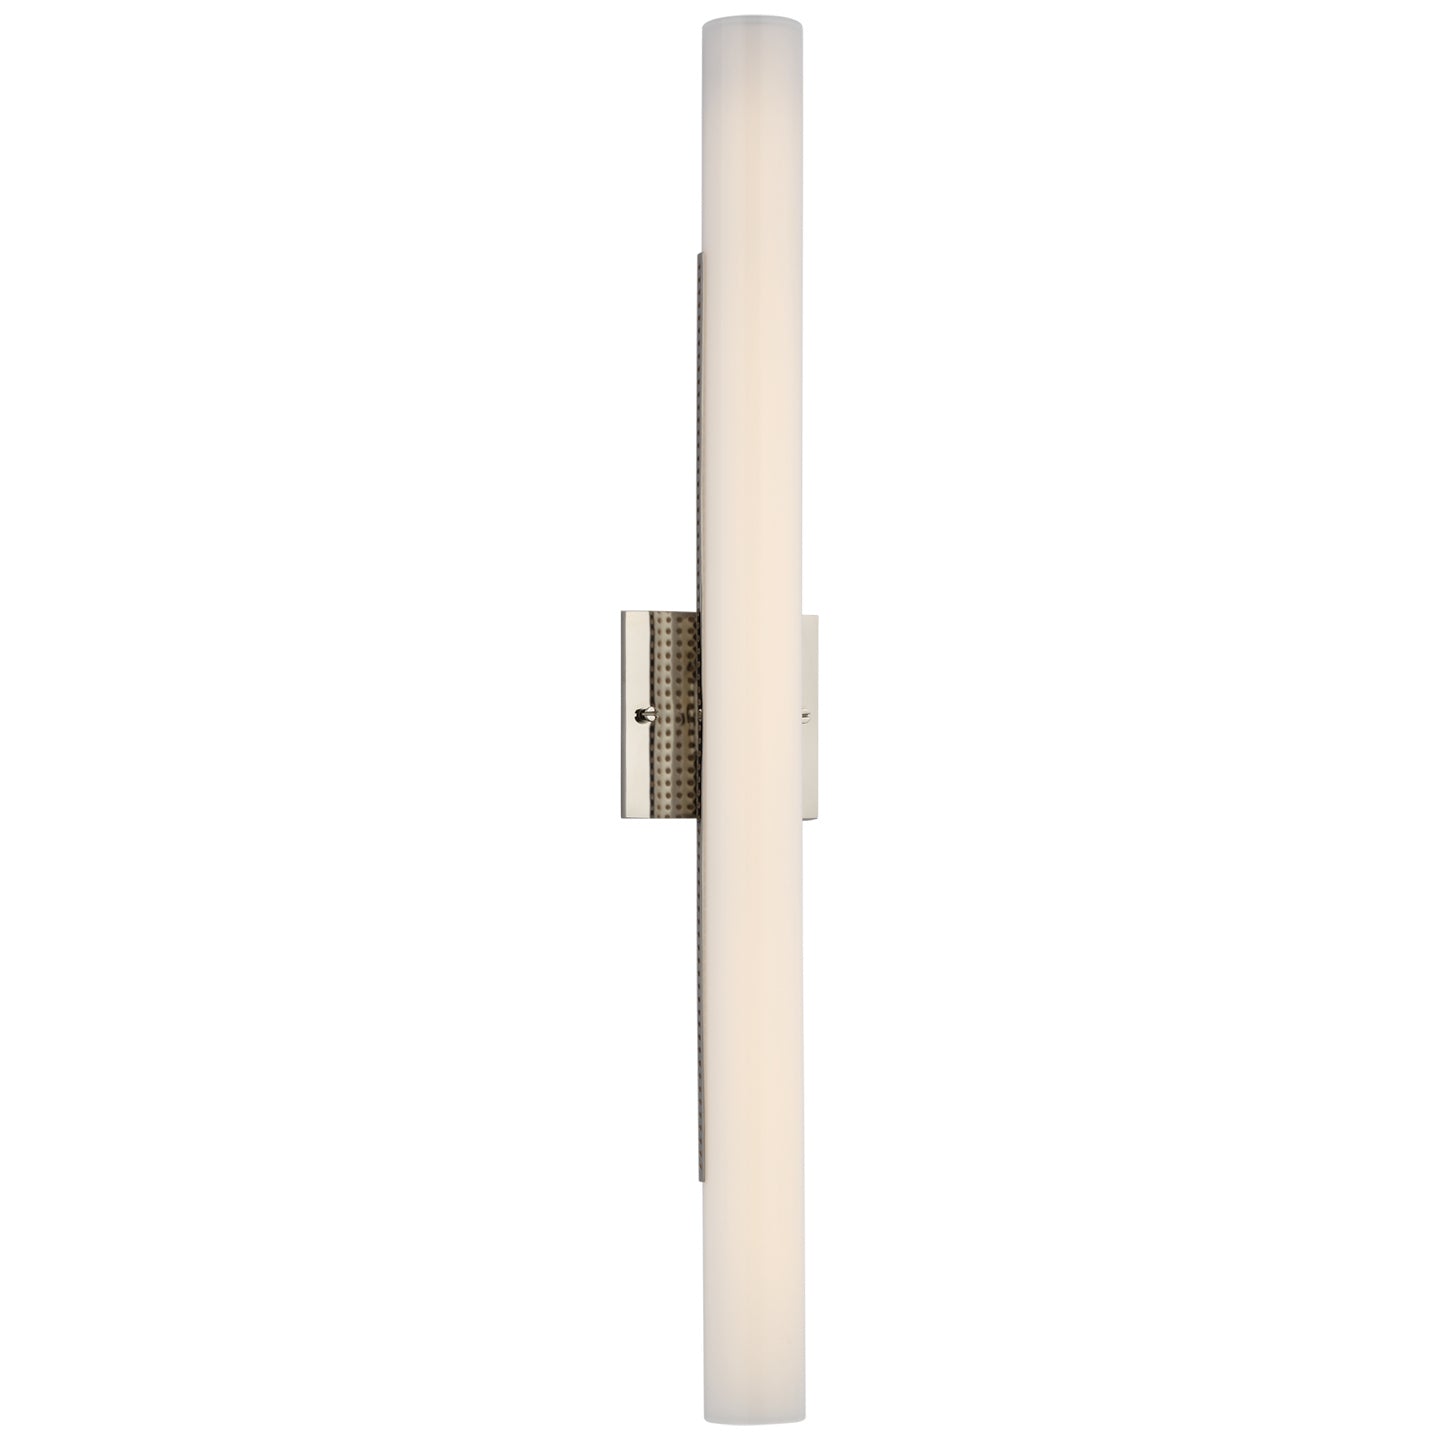 Load image into Gallery viewer, Visual Comfort Signature - KW 2224PN-WG - LED Bath Light - Precision - Polished Nickel
